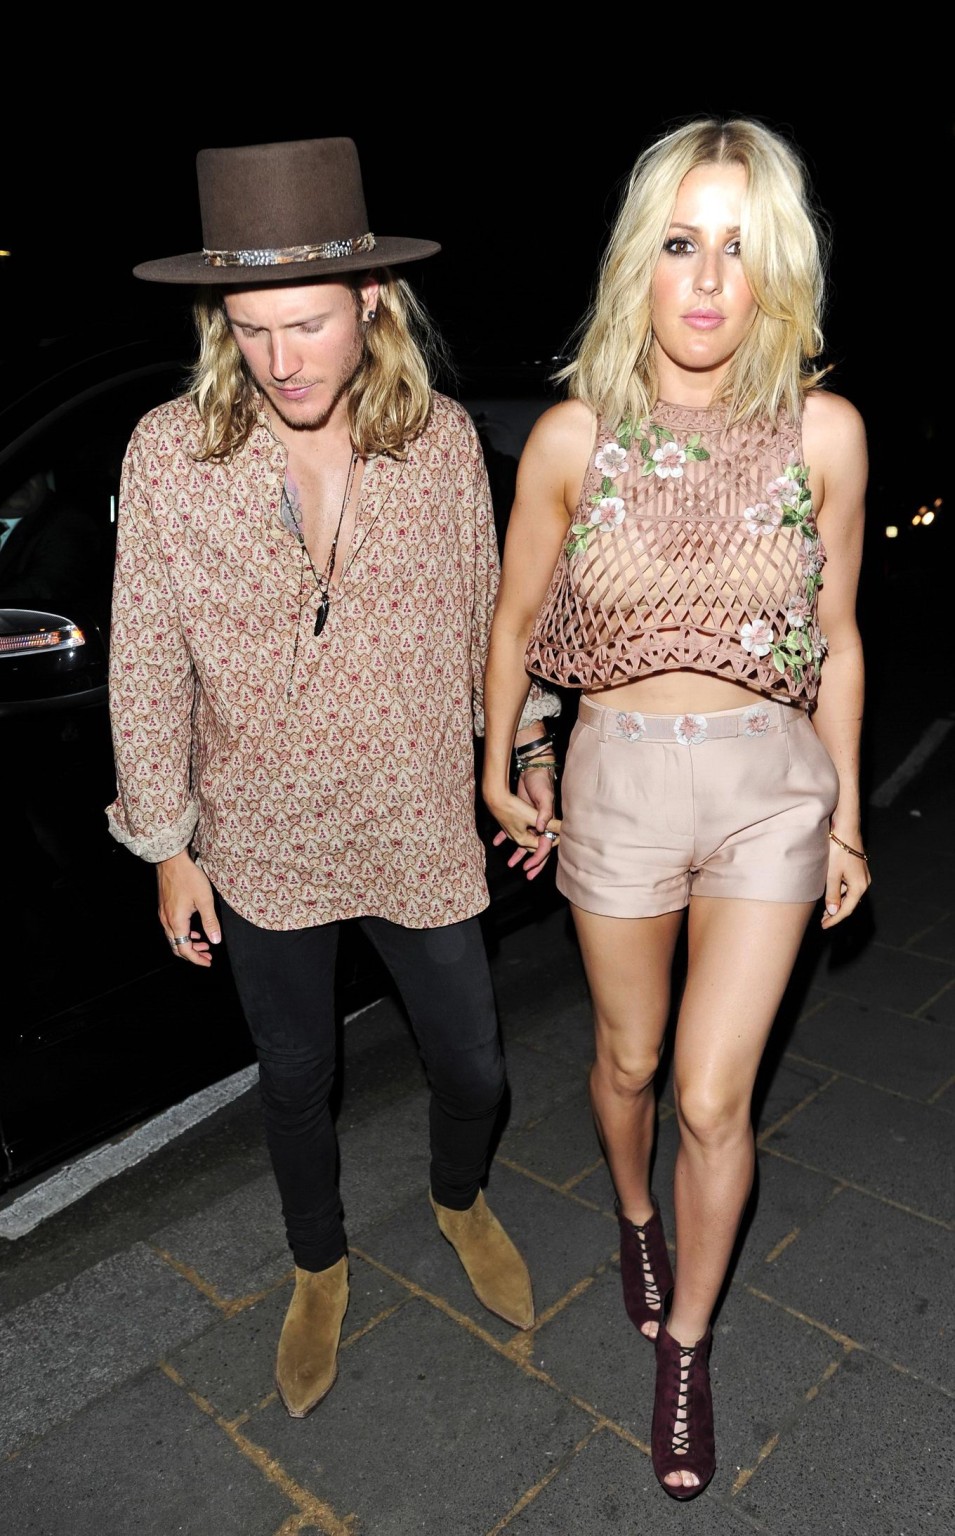 Ellie goulding leggy see through to bra out in london
 #75164082